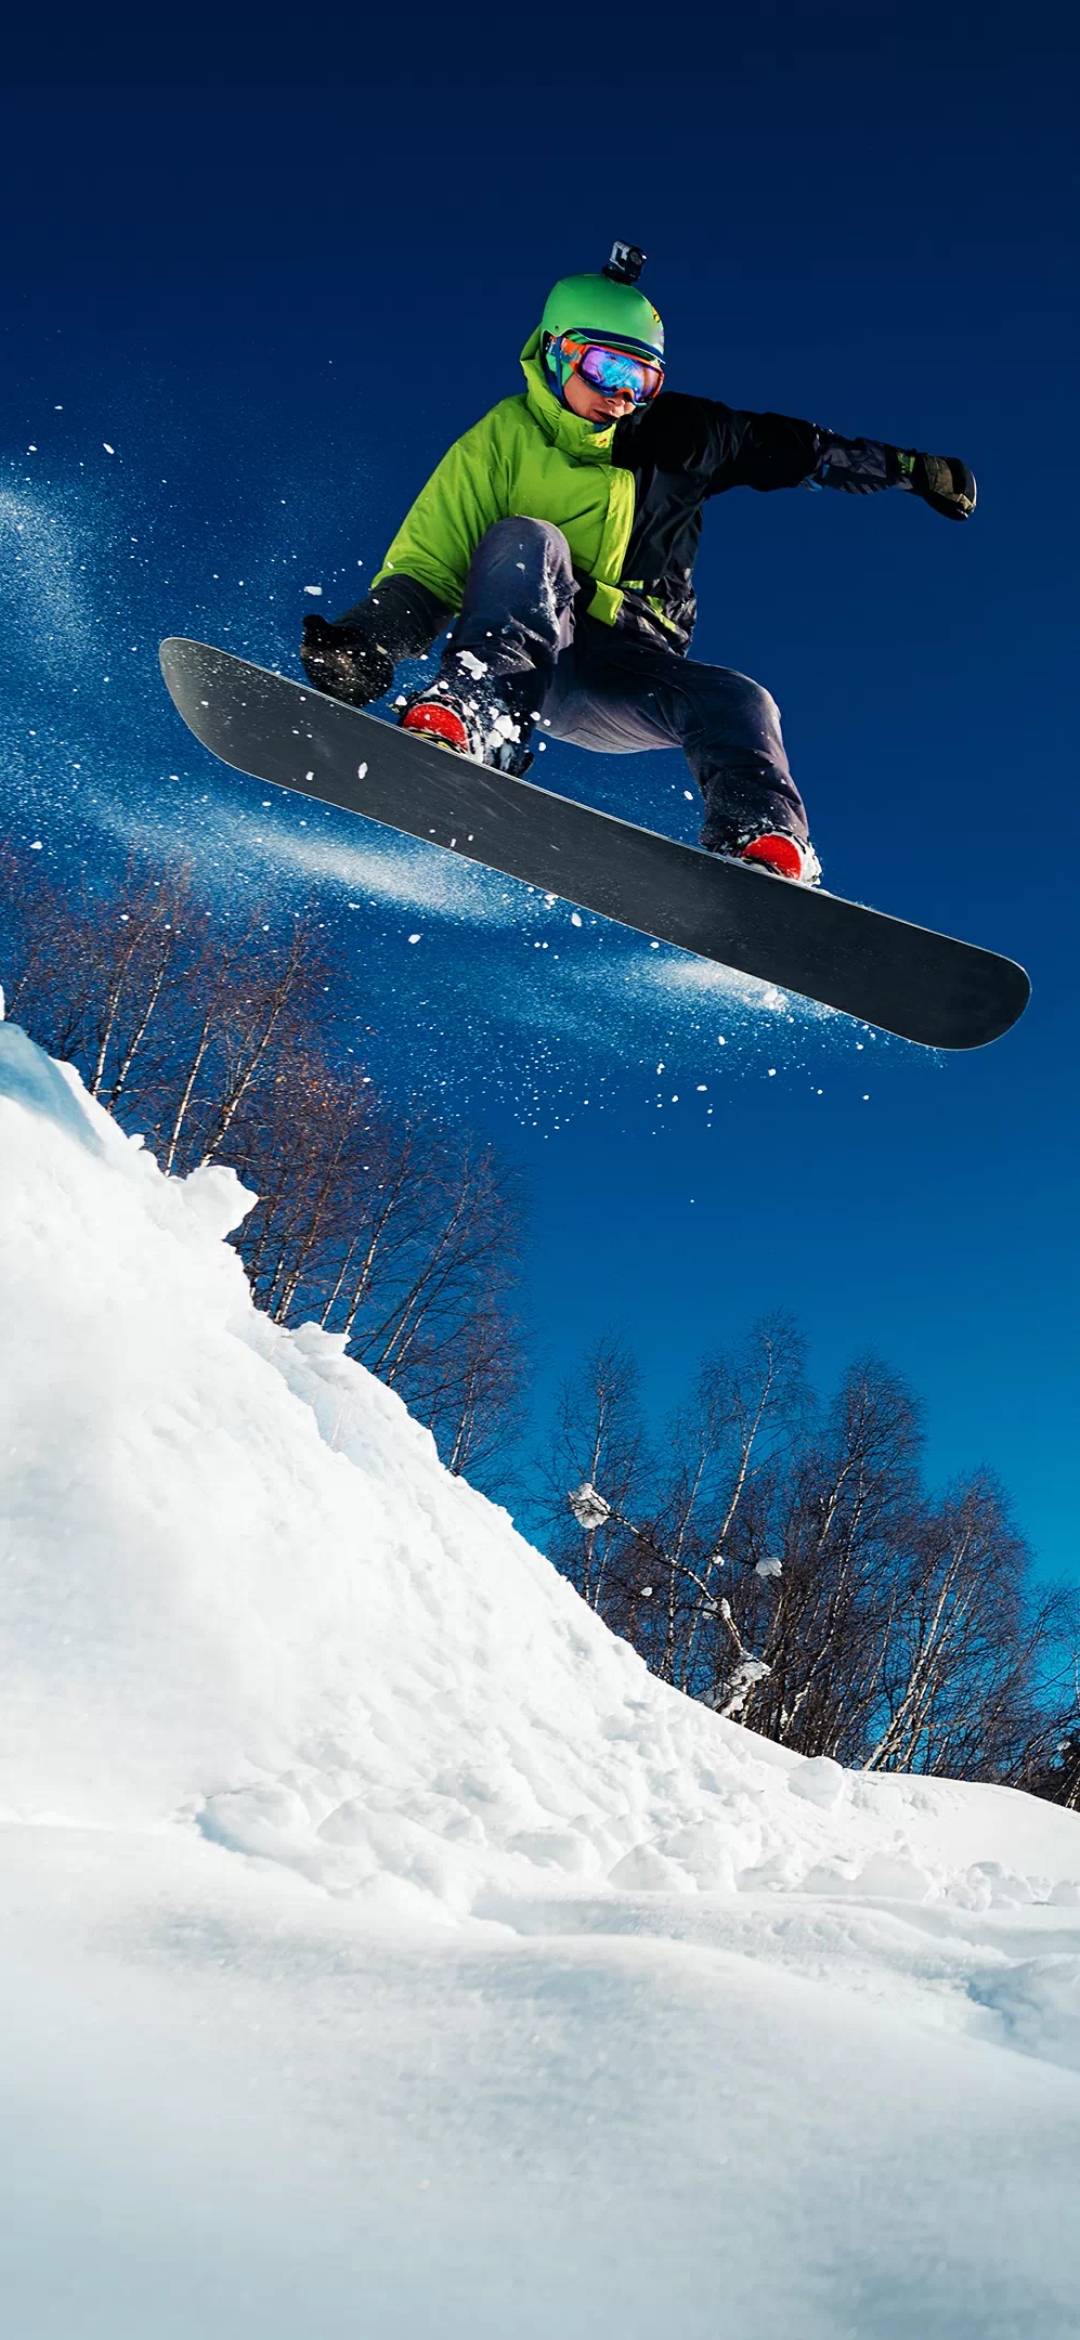 73000 Snowboard Wallpaper Pictures